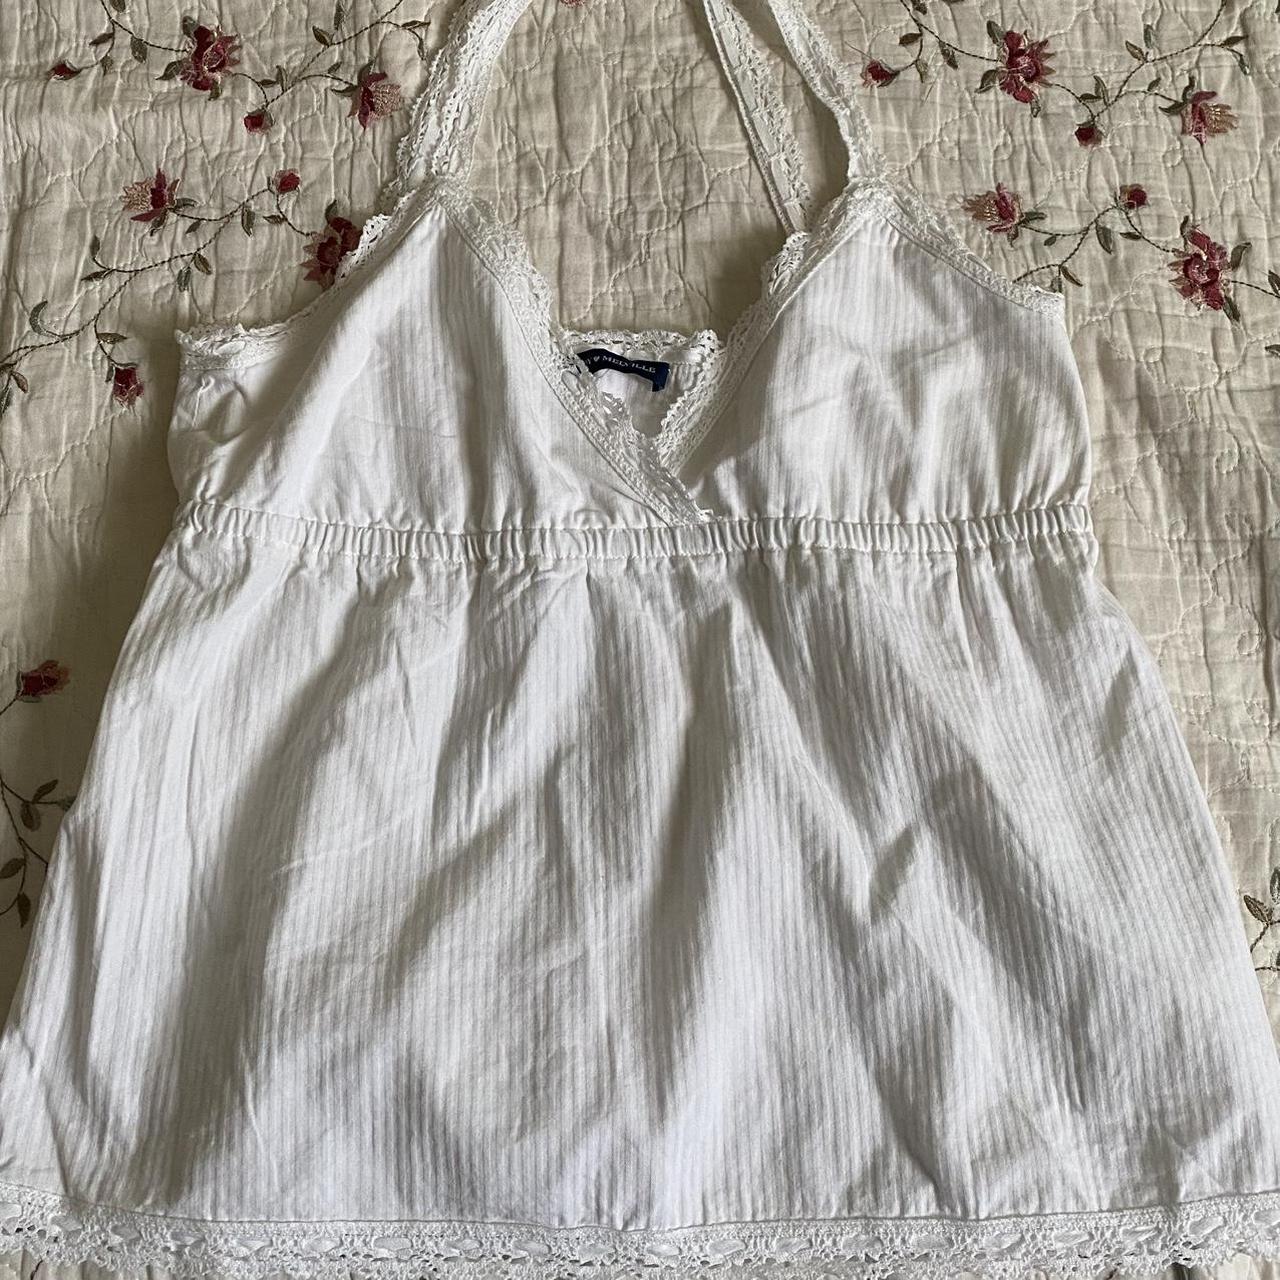 Brandy Melville Edith lace tank - i'm obsessed - Depop